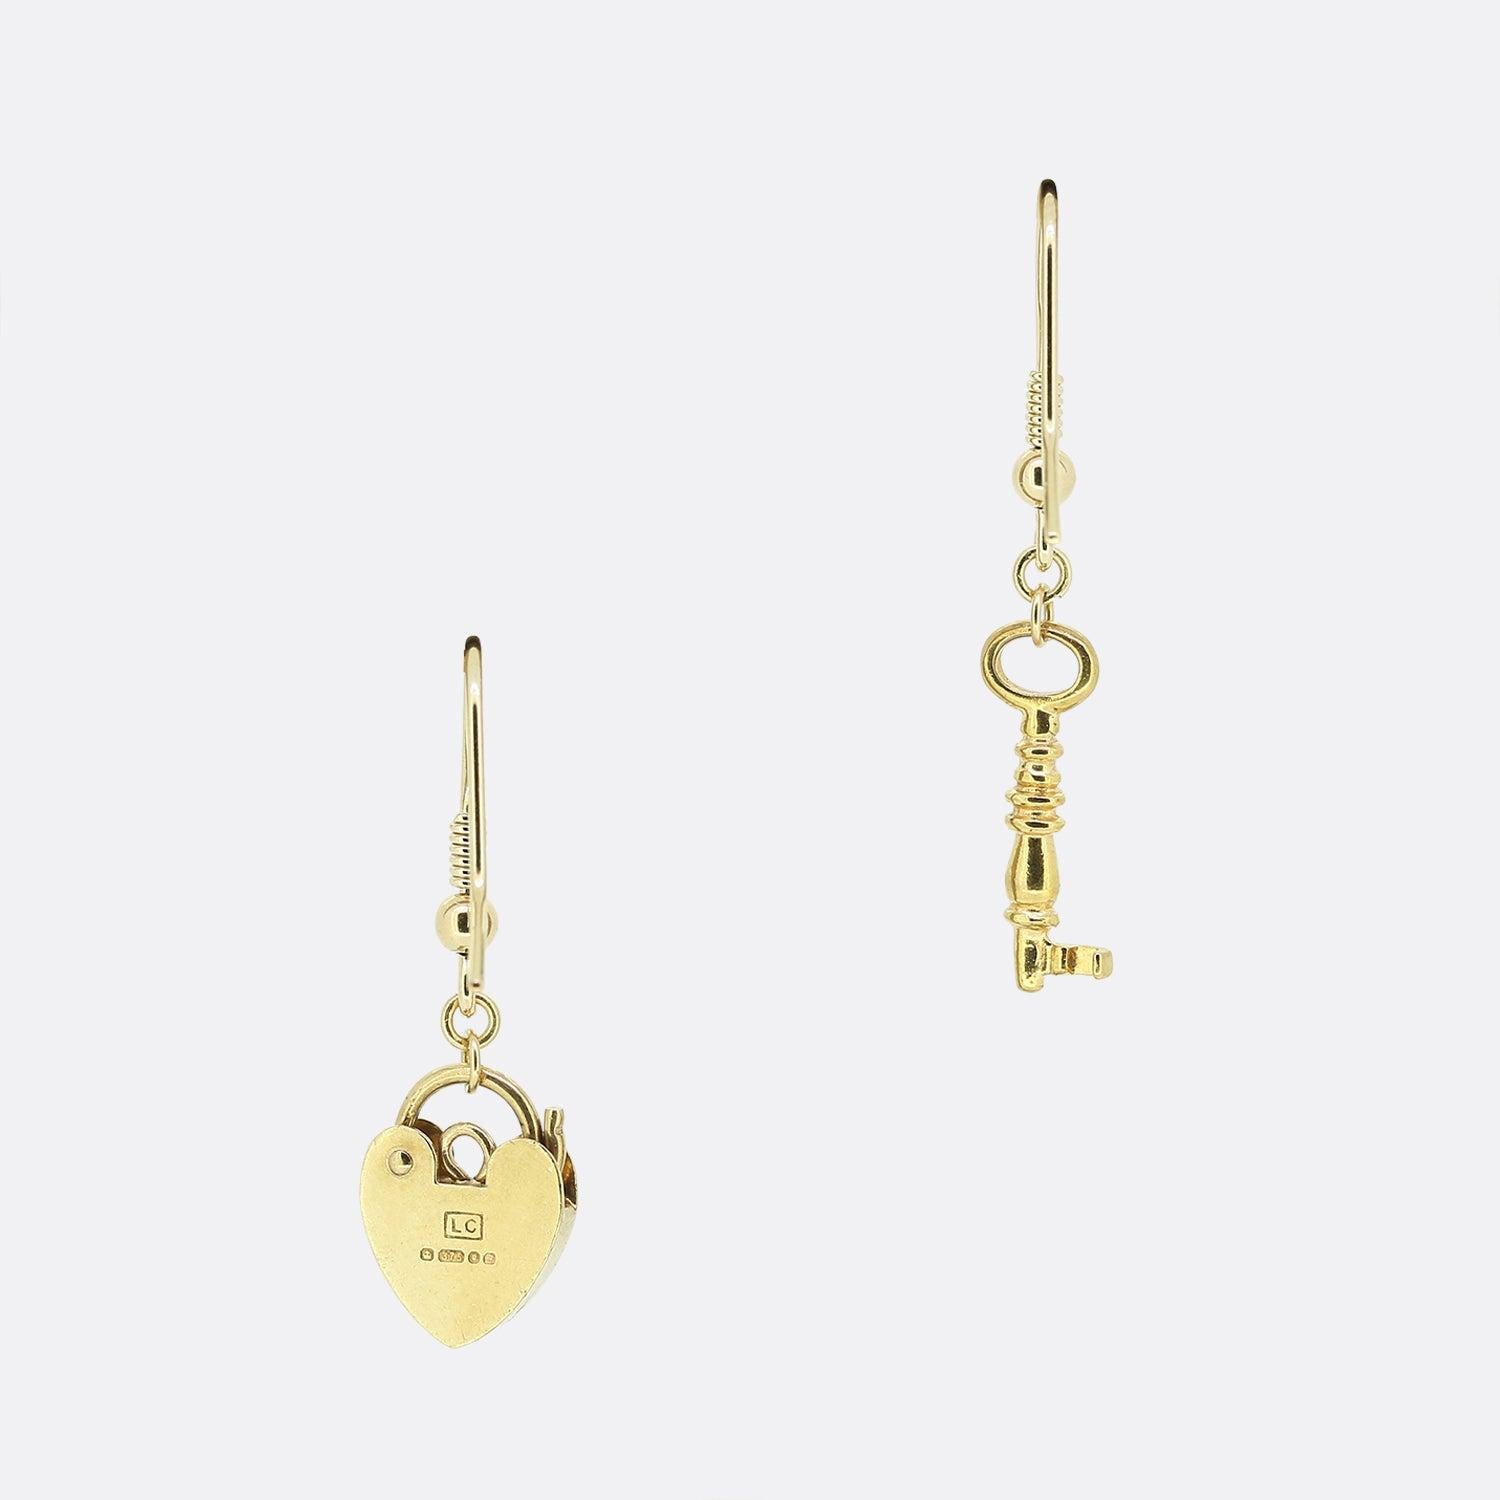 This is a pair of vintage 9ct yellow gold drop earrings. One earring features a padlock charm and the other features a key charm that both sit at the bottom of the fancy chain.

Condition: Used (Very Good)
Total Weight: 2.3 grams
Earring Dimensions: